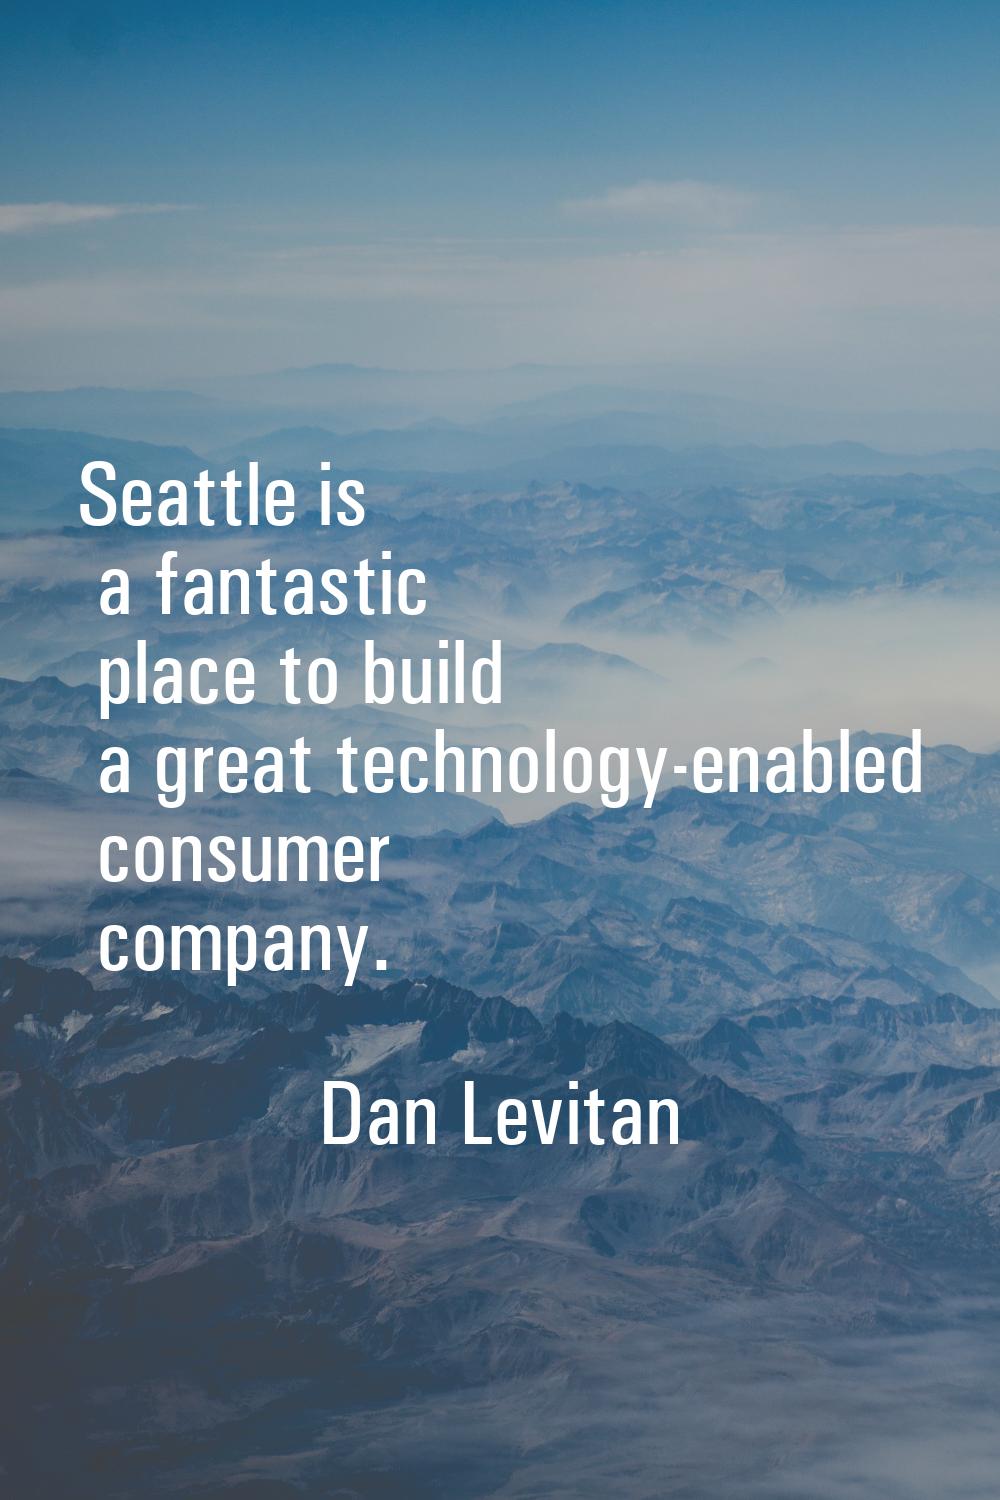 Seattle is a fantastic place to build a great technology-enabled consumer company.